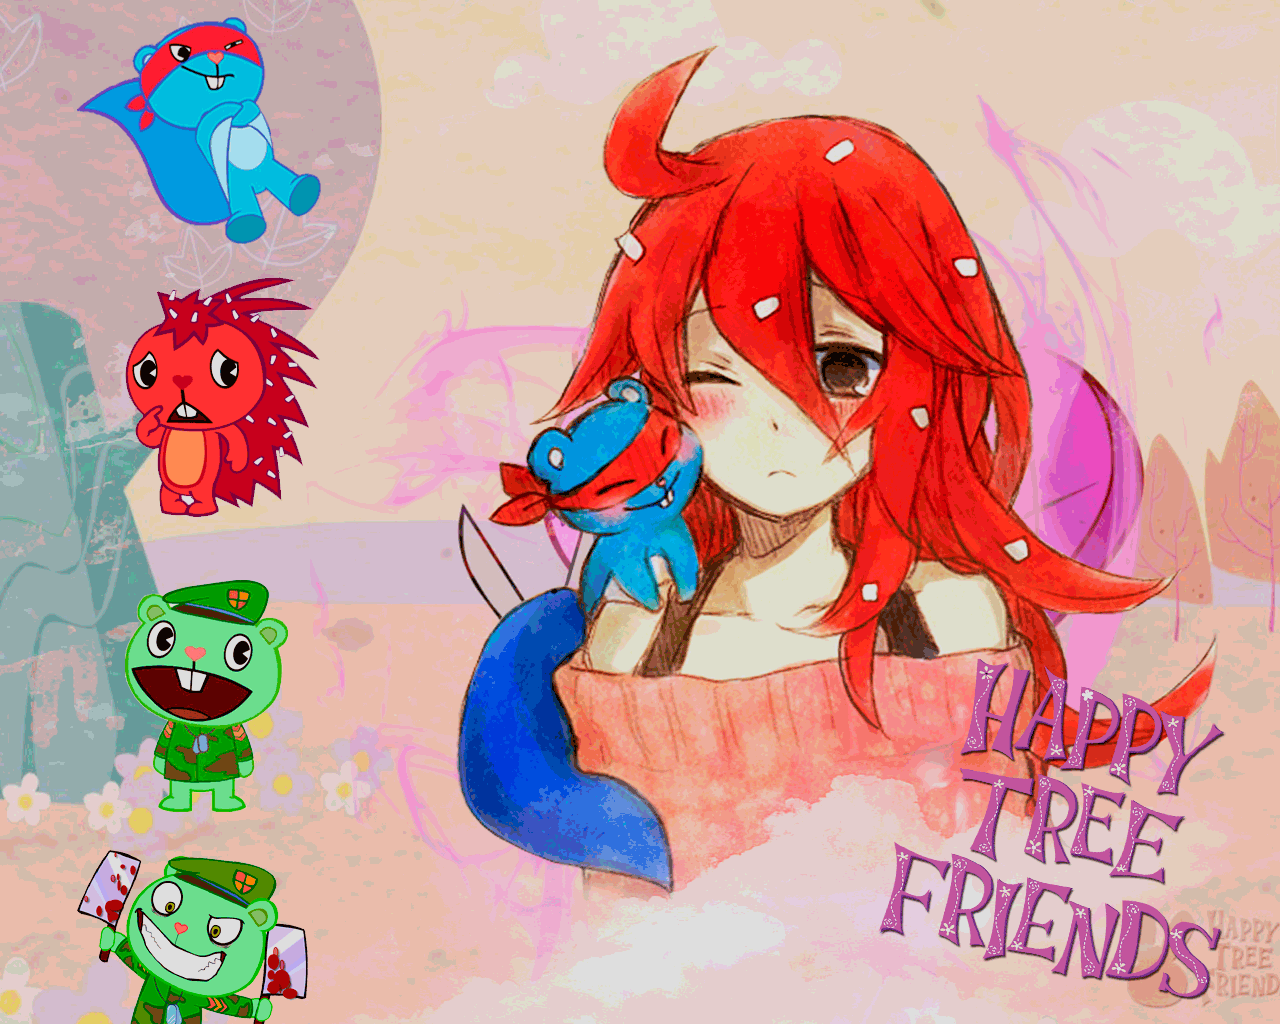 Happy Tree Friends Wallpaper Gif By Hitsukinyan